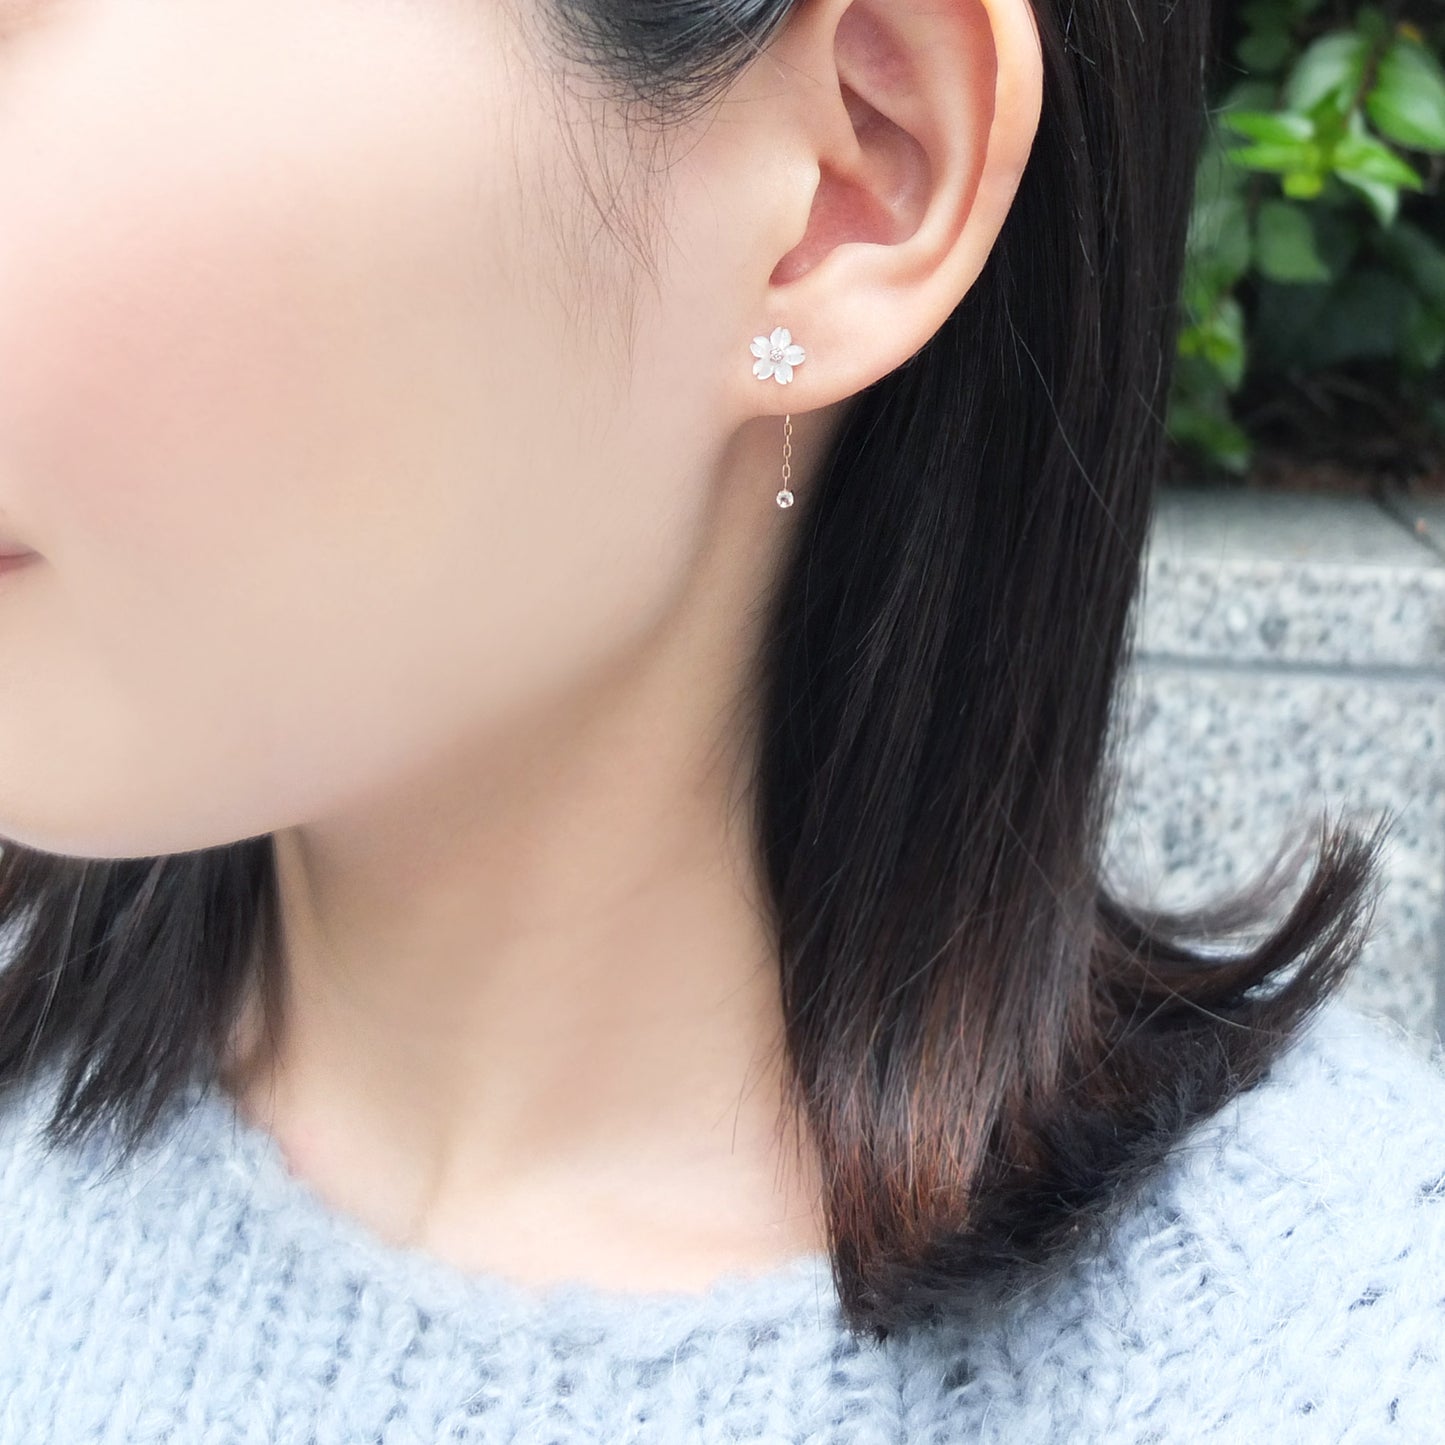 [Birth Flower Jewelry] April Cherry Blossoms Earrings (Rose Gold) - Model Image